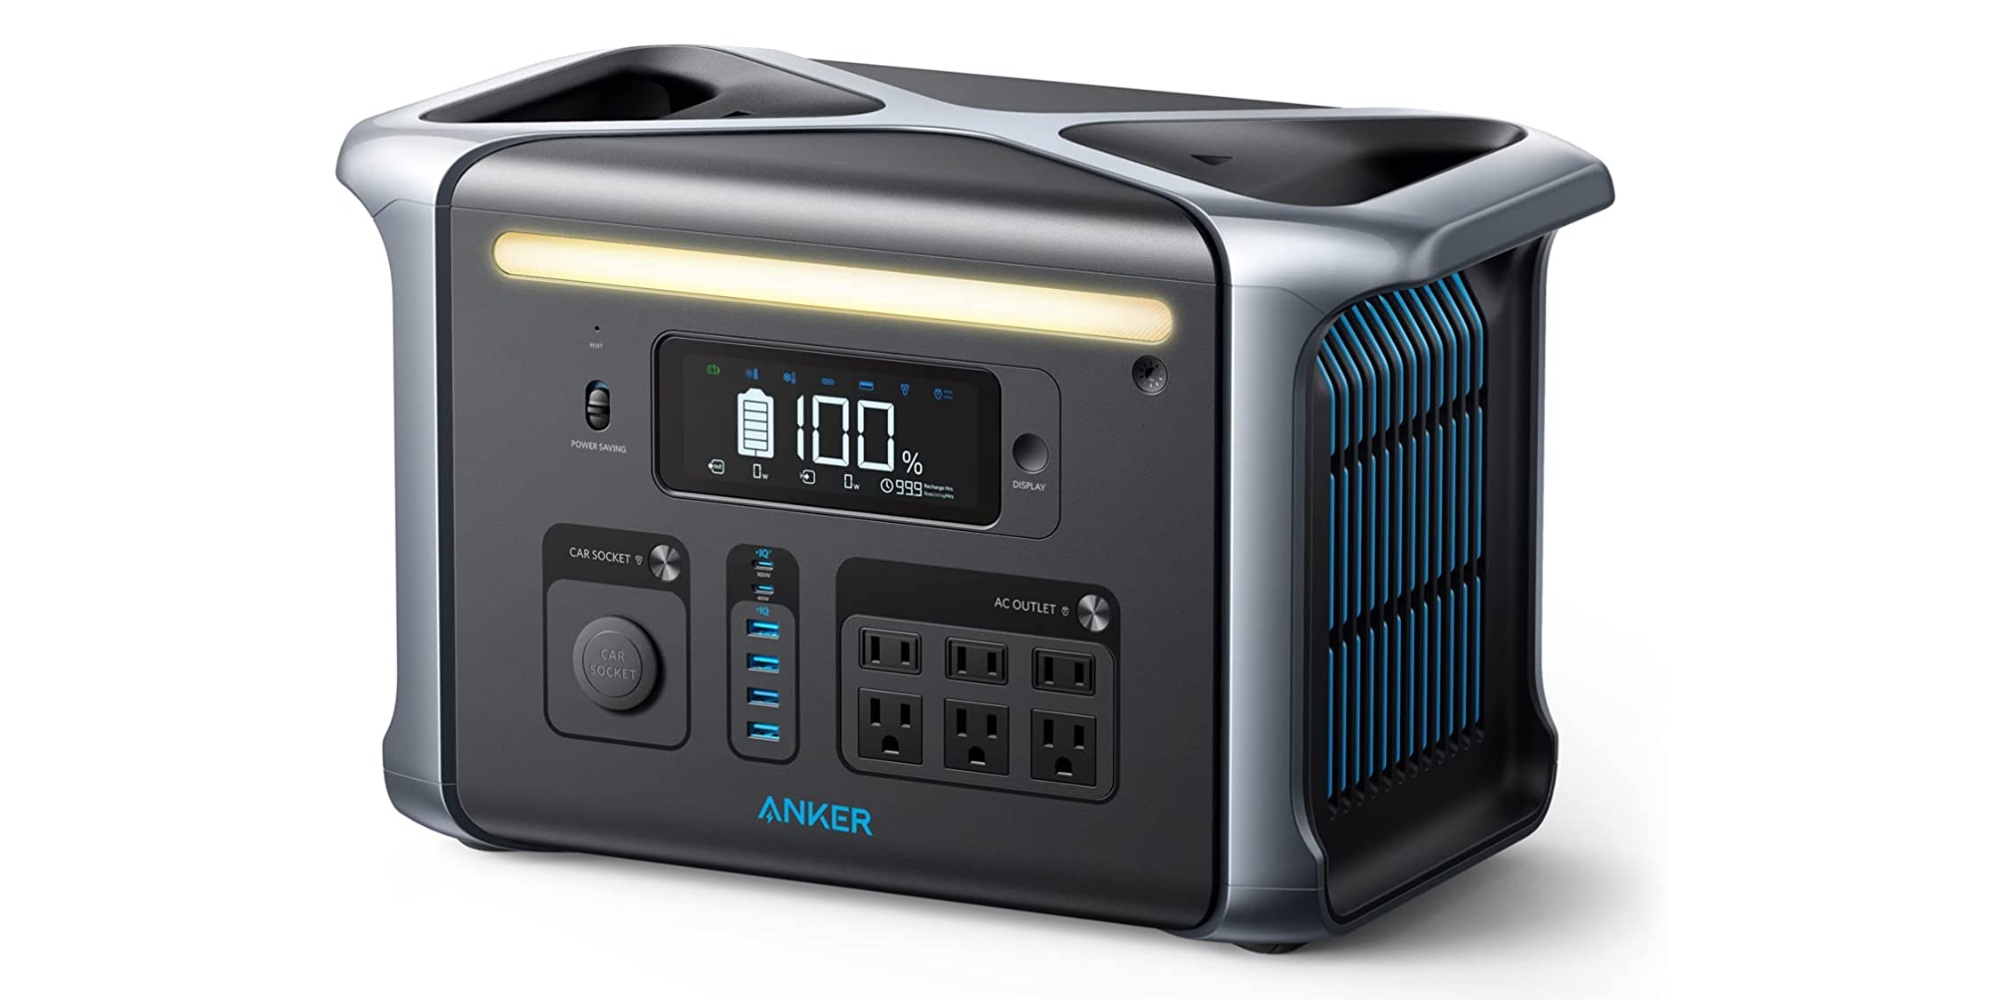 Anker PowerHouse 1229Wh power station on sale for first time at